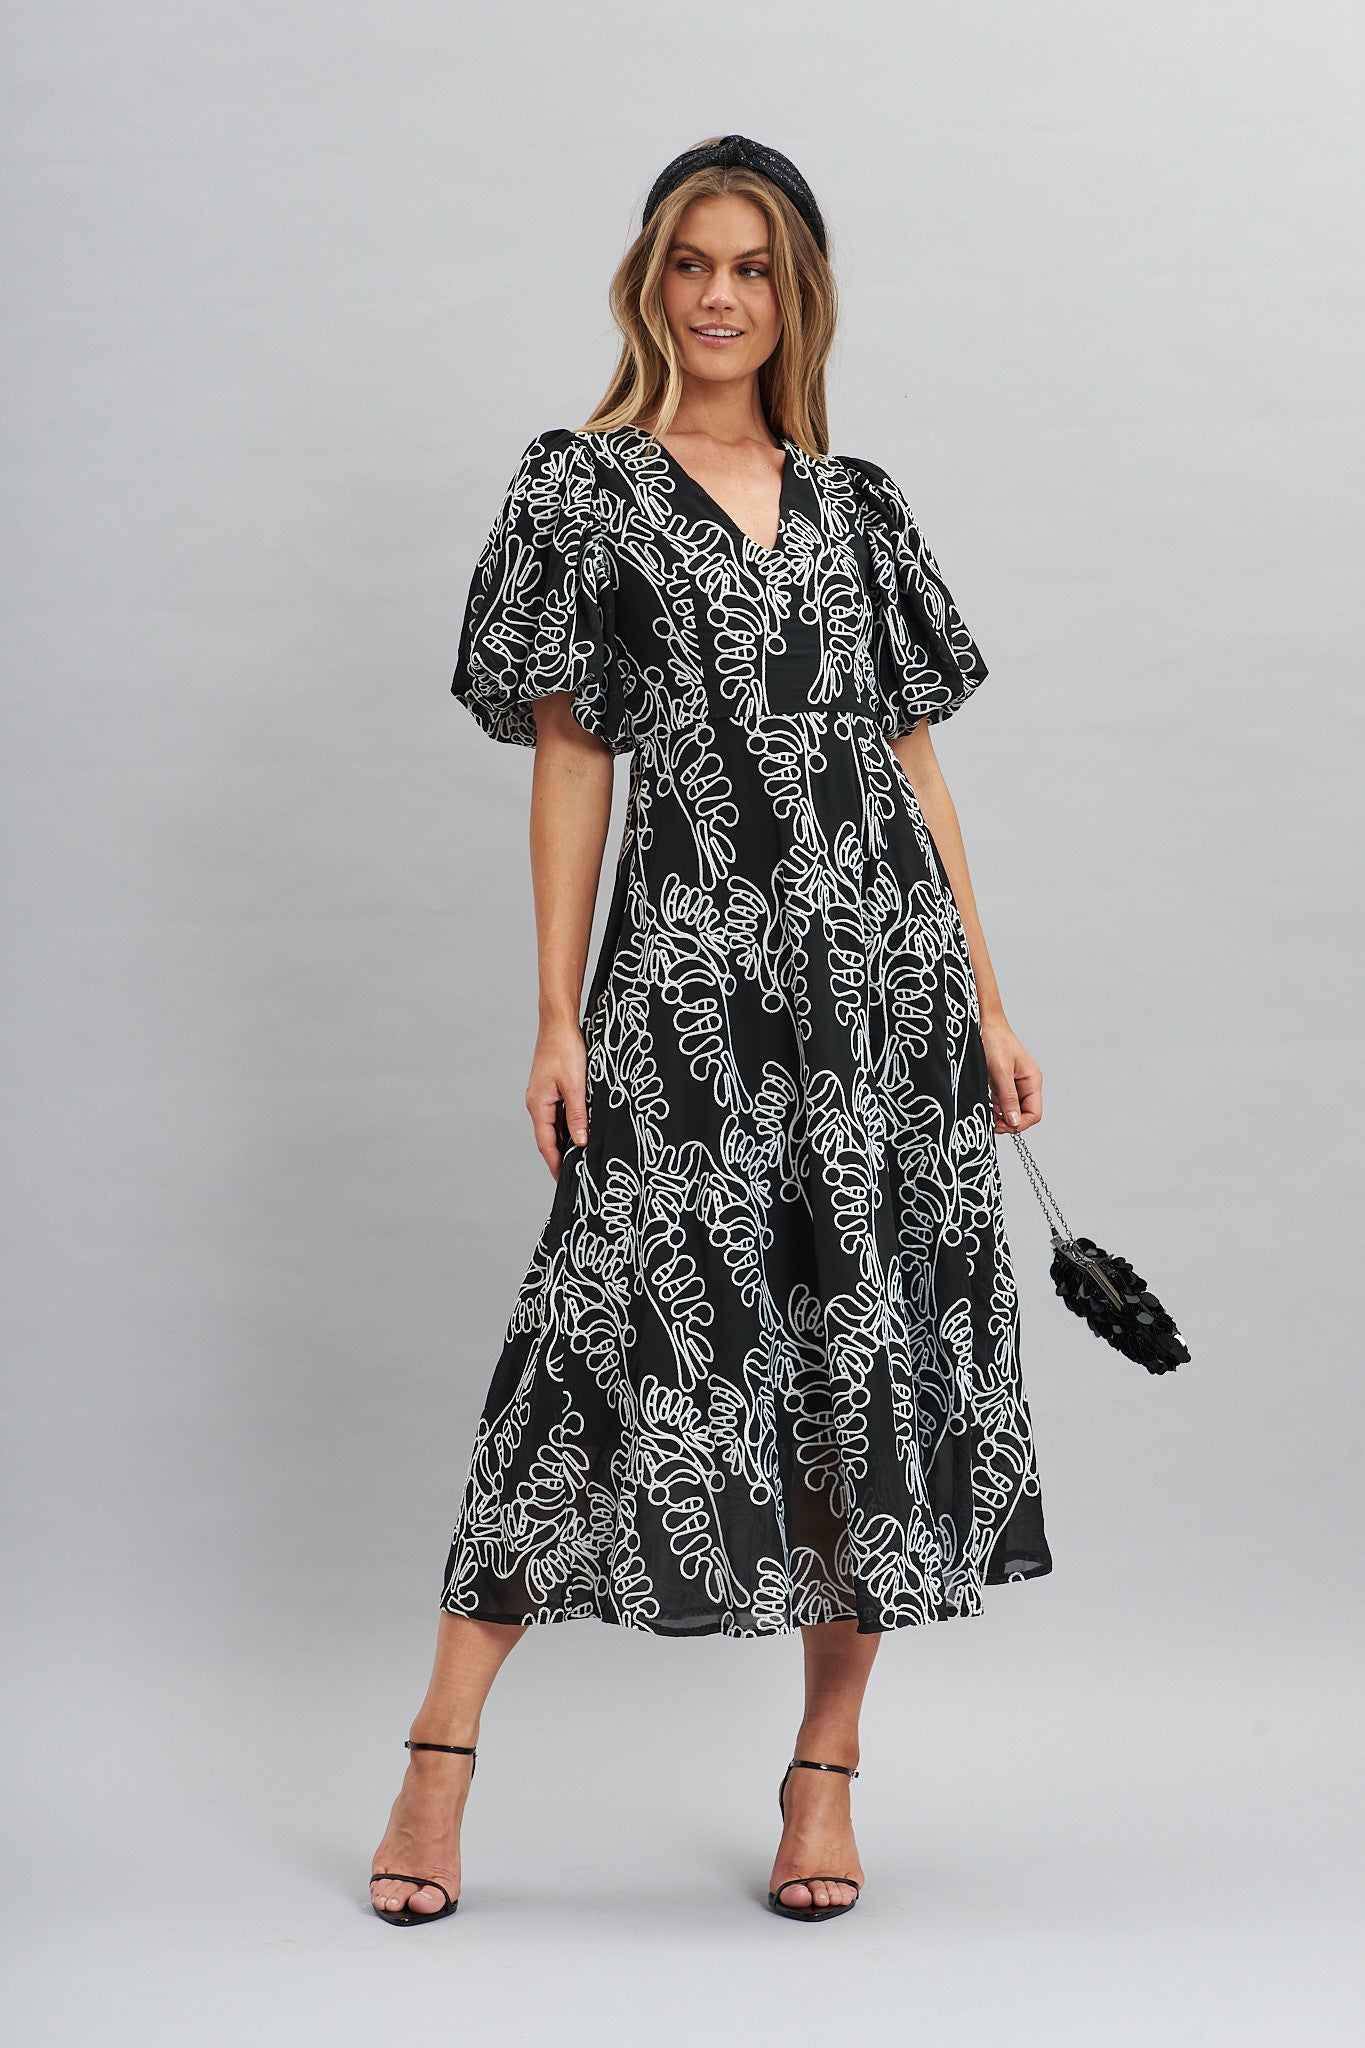 Tiffany Maxi Dress In Black With White Embroidery - full length